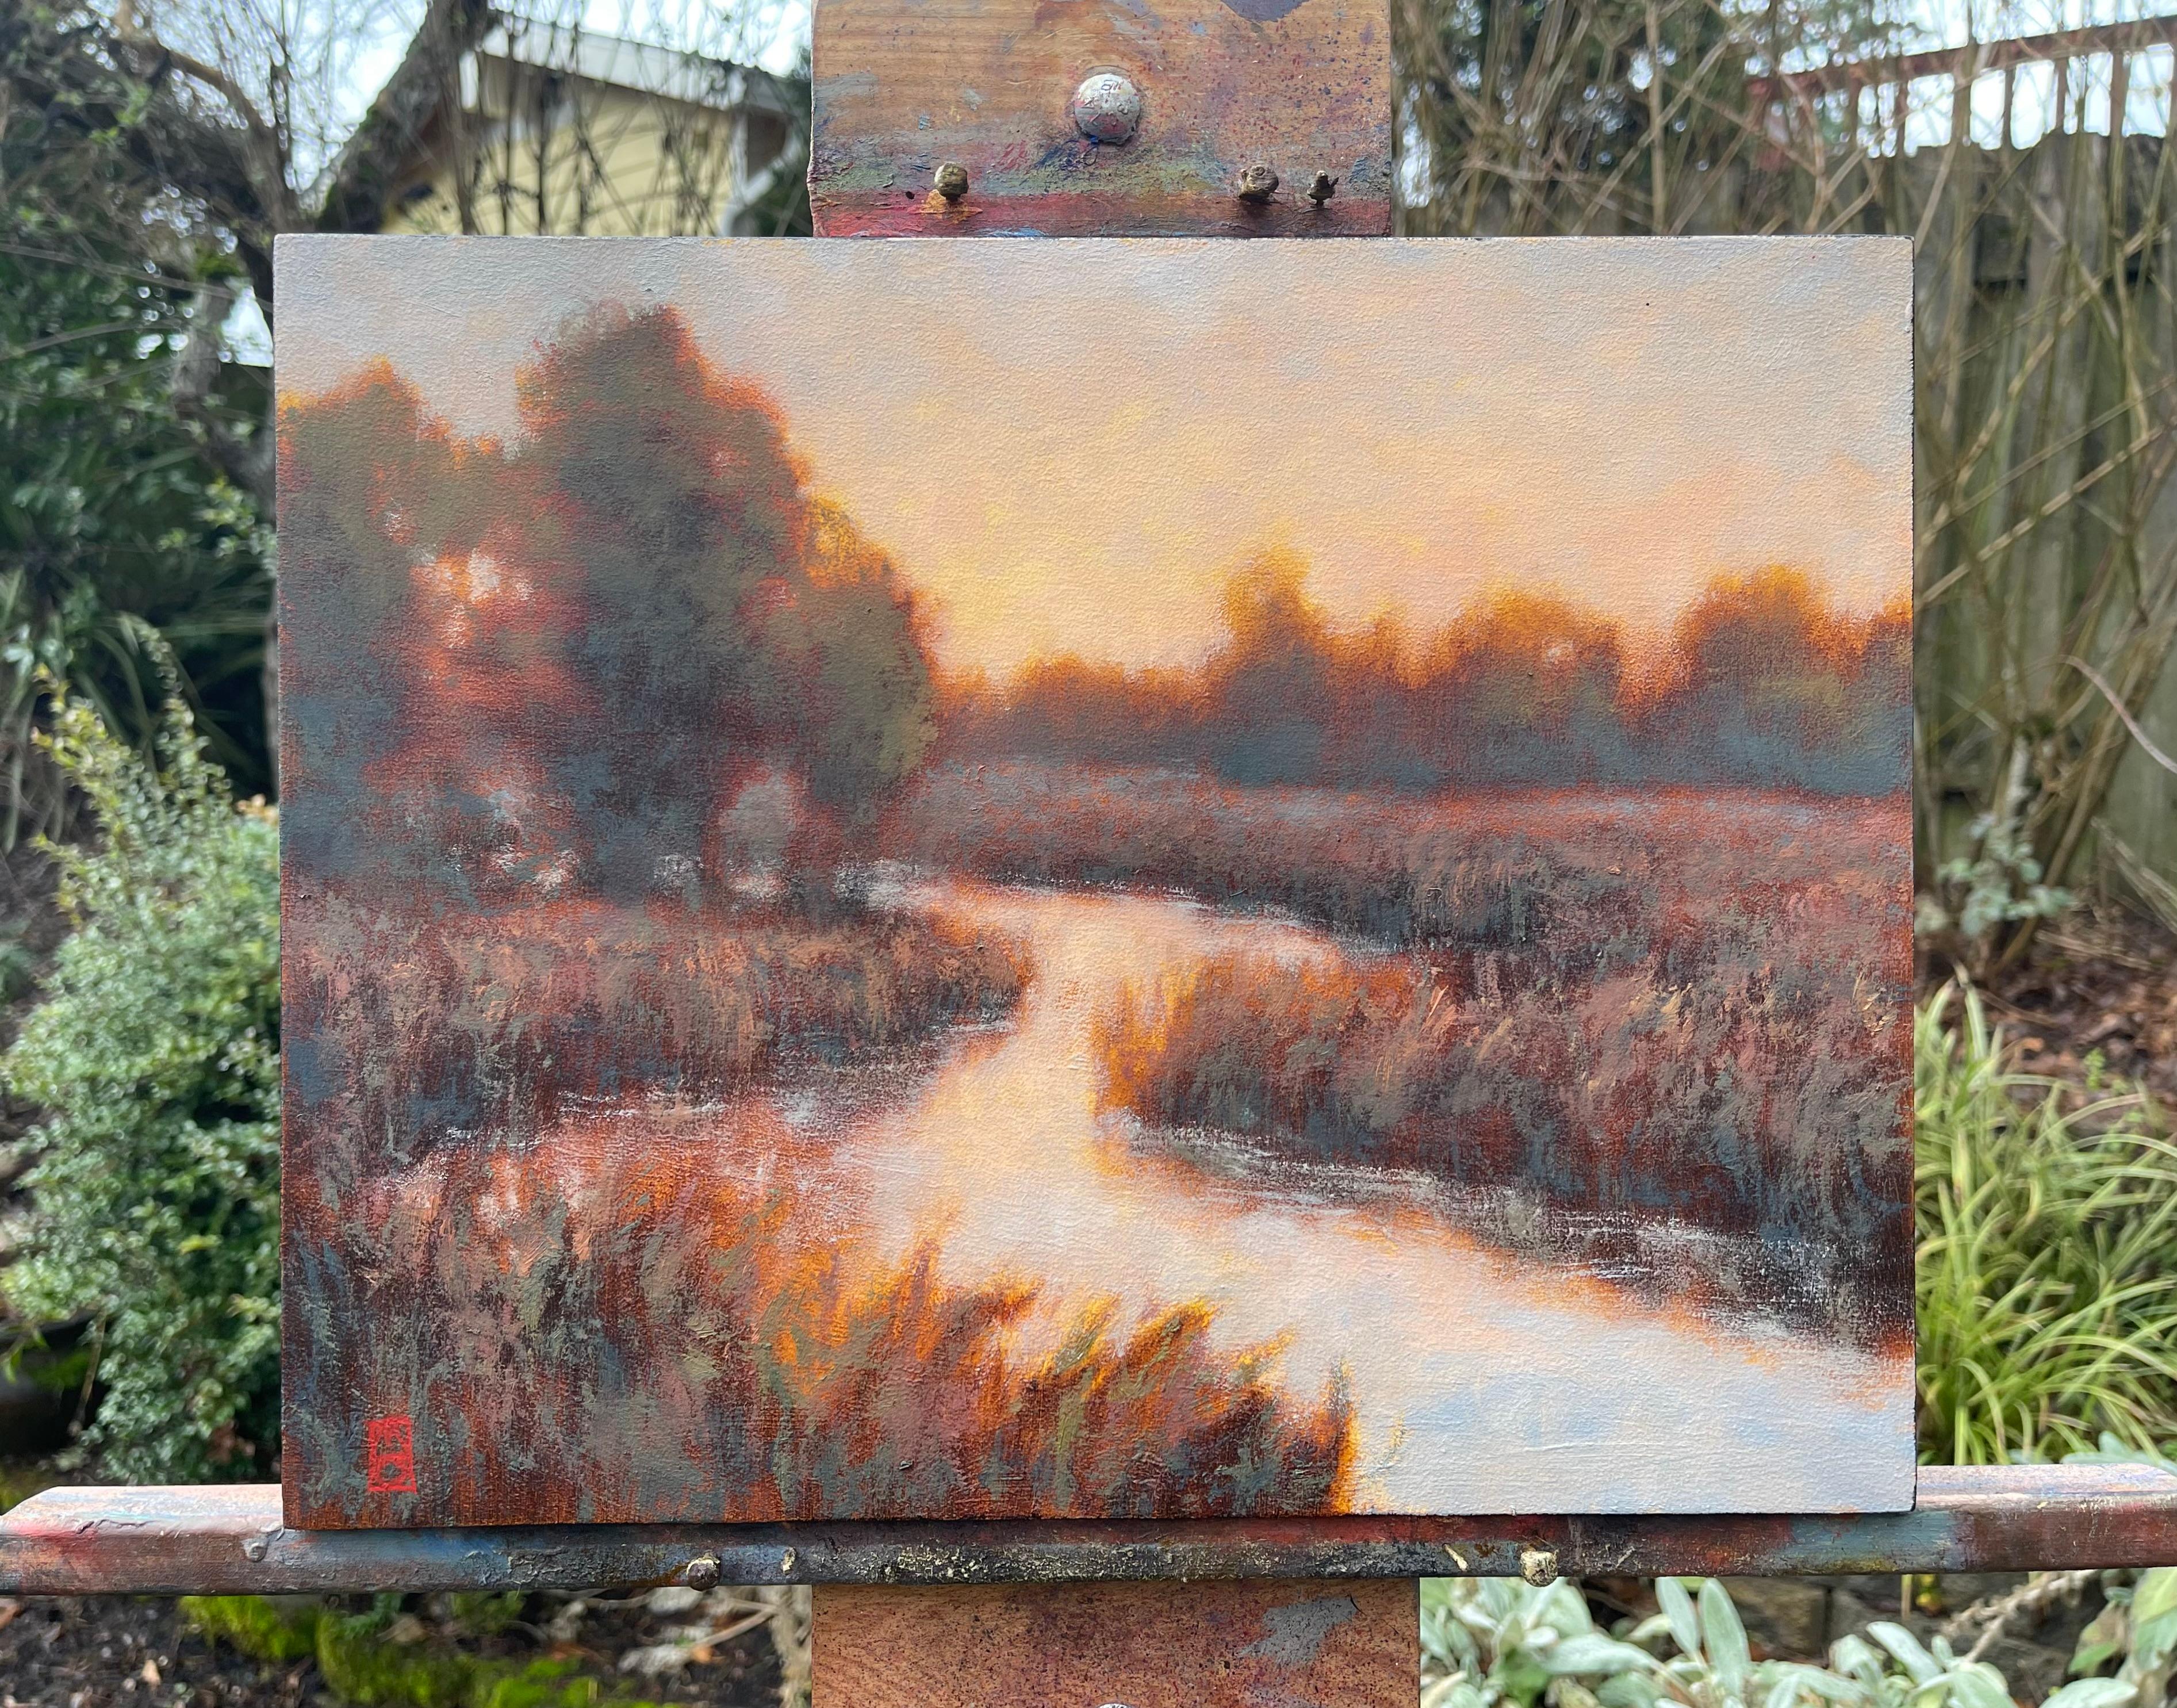 <p>Artist Comments<br>Artist Michael Orwick depicts a lovely view of a flowing brook winding through a verdant marsh. Tall reeds boldly stand next to the water and create a serene environment. As the sun sets in the distance, warm backlighting from